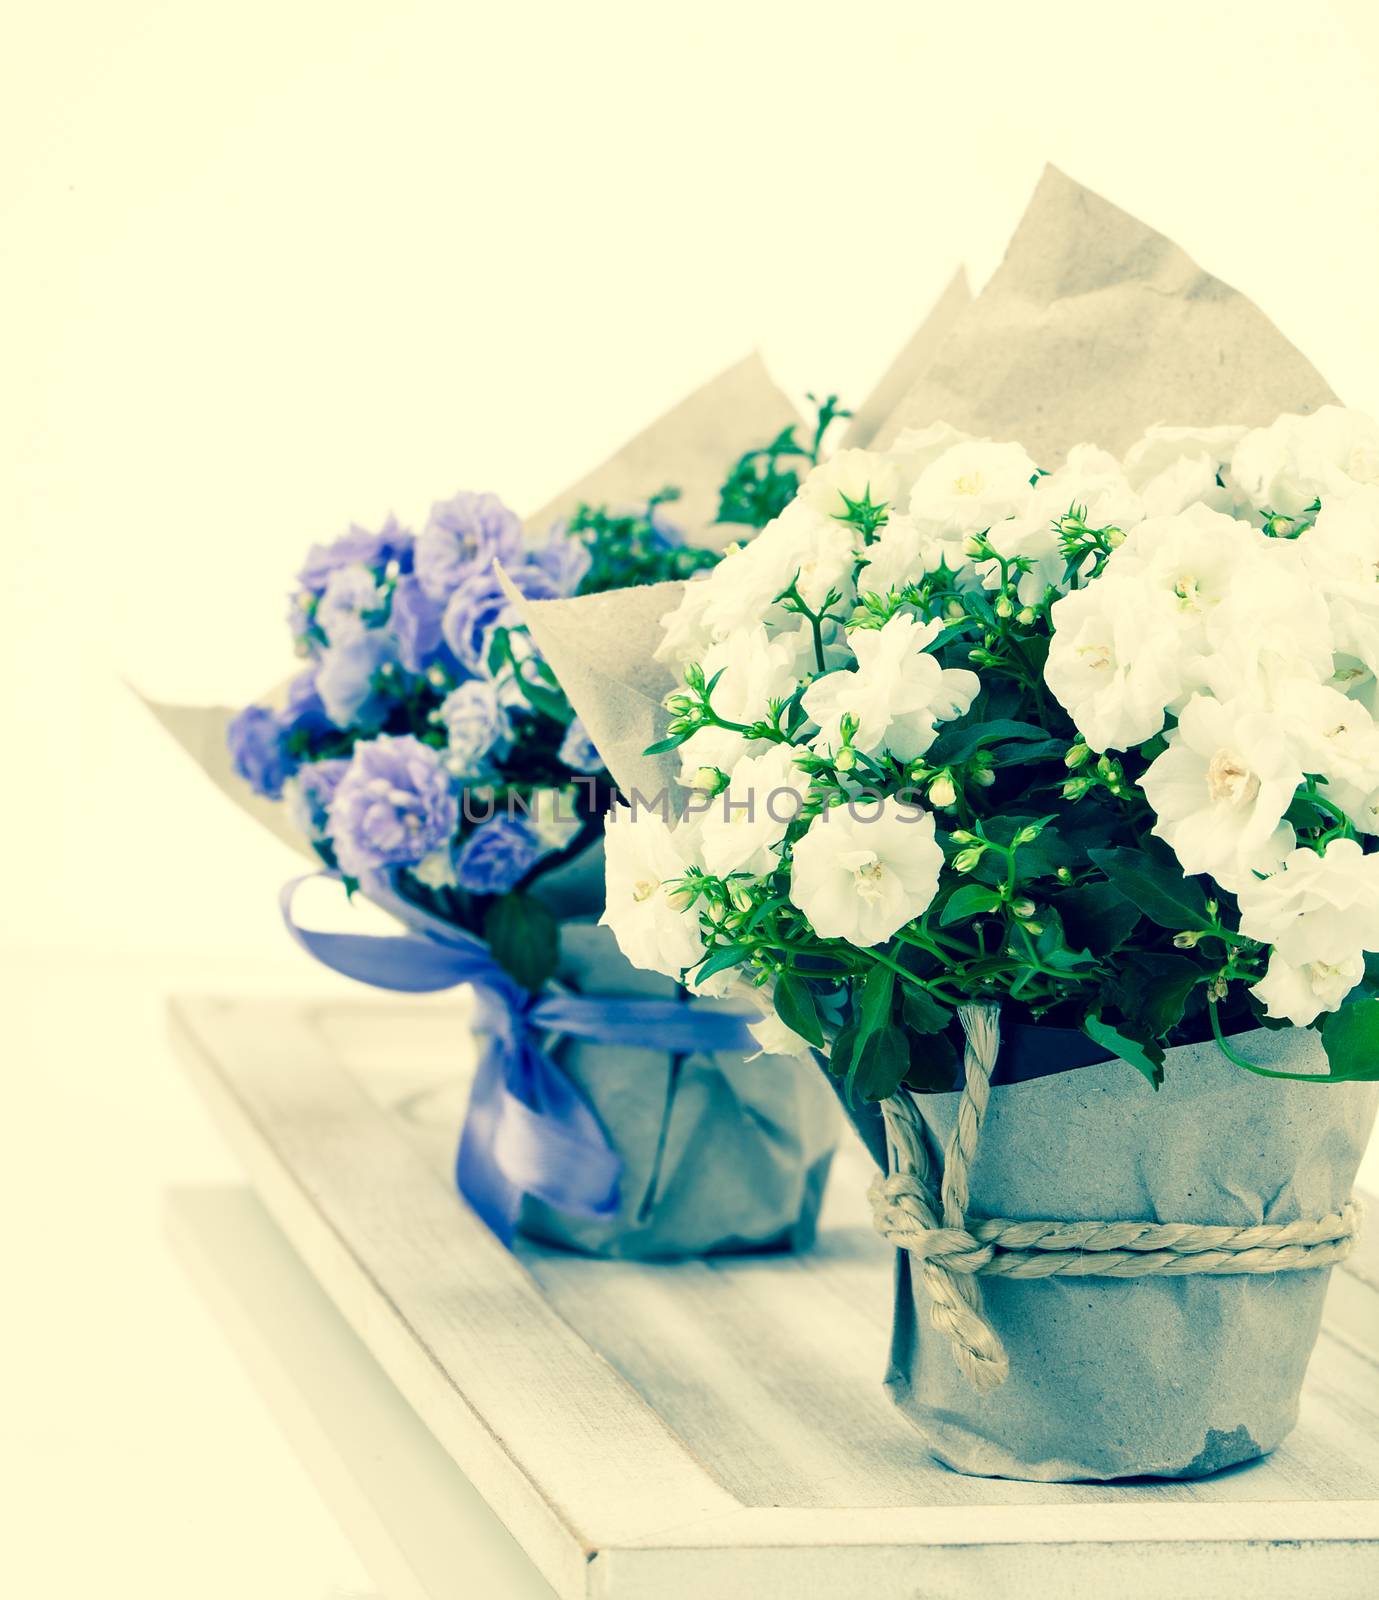 Campanula terry with blue and white flowers in paper packaging